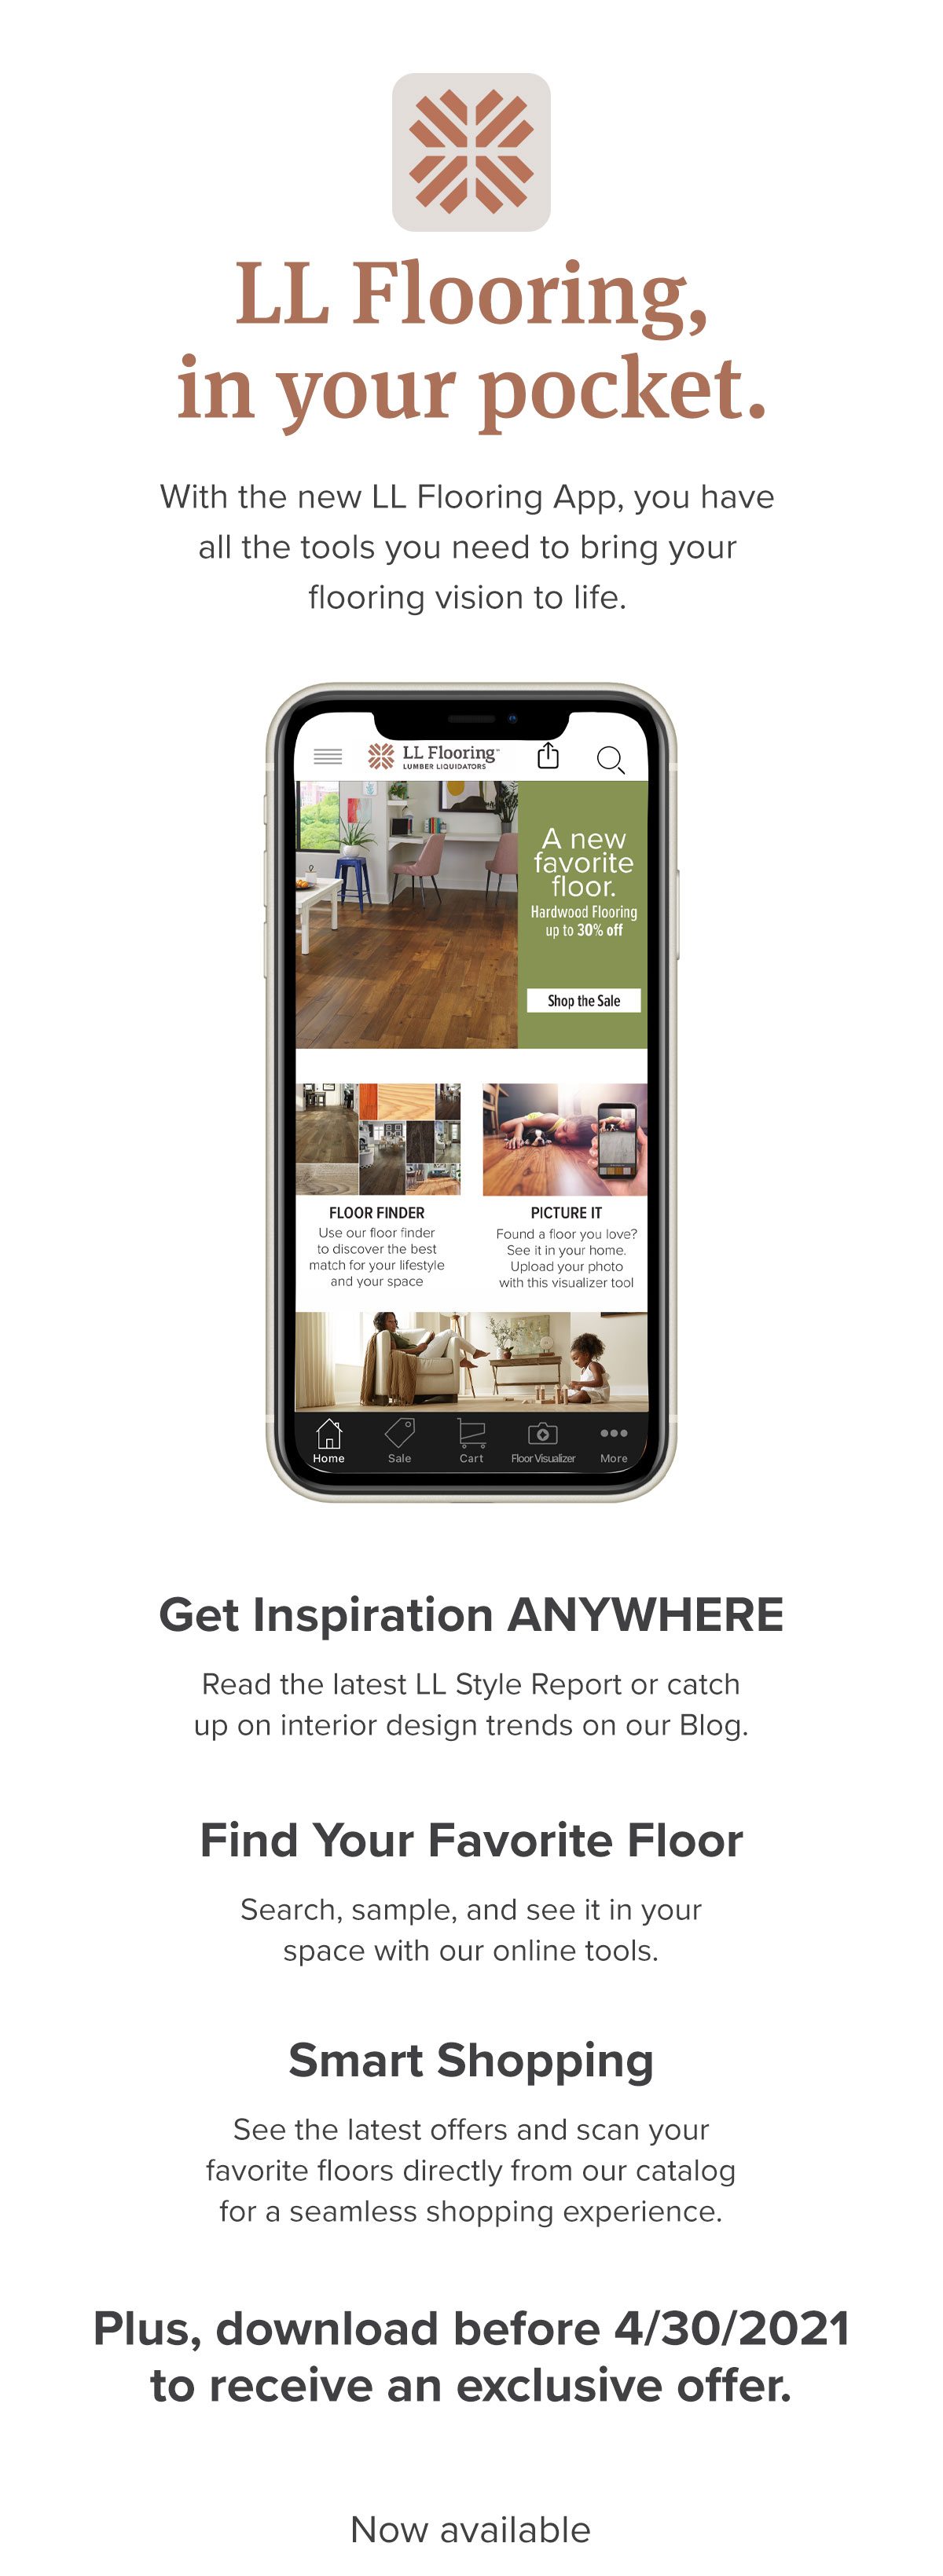 LL Flooring, in your pocket – with the new App, you have all the tools you need!